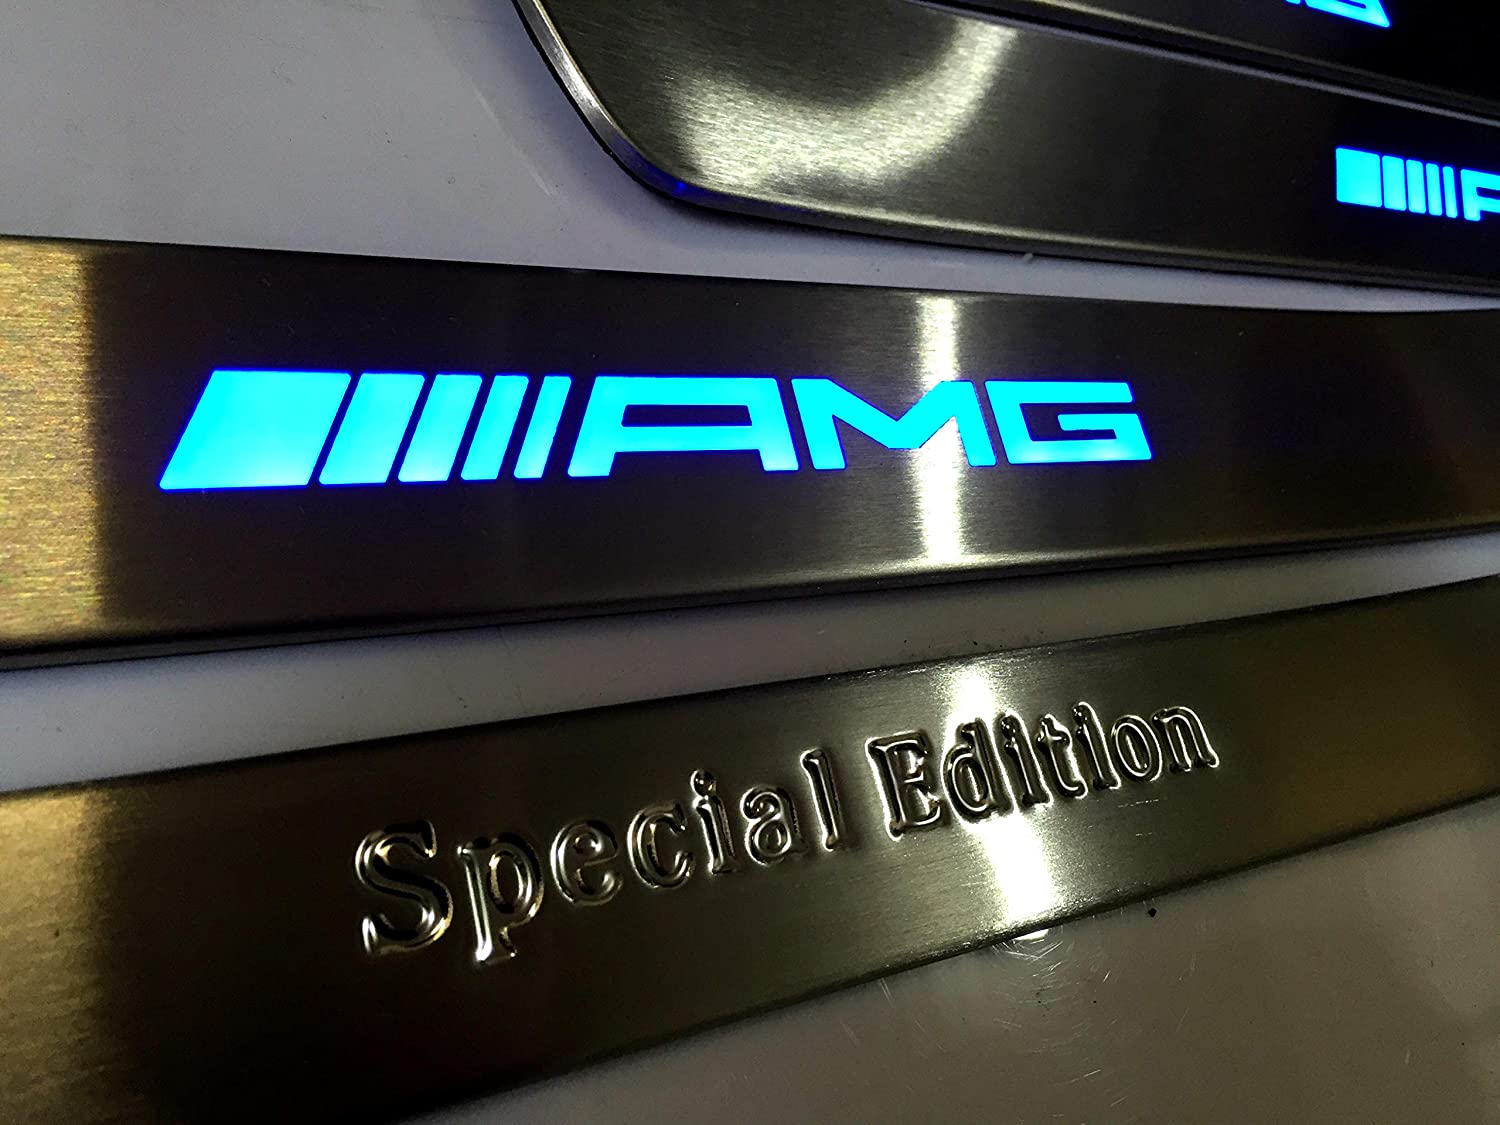 Mercedes-Benz Compatible with AMG Special Edition W222 S222 S63 S500 S550 S65 S Class Entrance mouldings LED Illuminated Door Sills Interior Trim Set 8 pcs Stainless Steel Polished Chrome Blue Sign